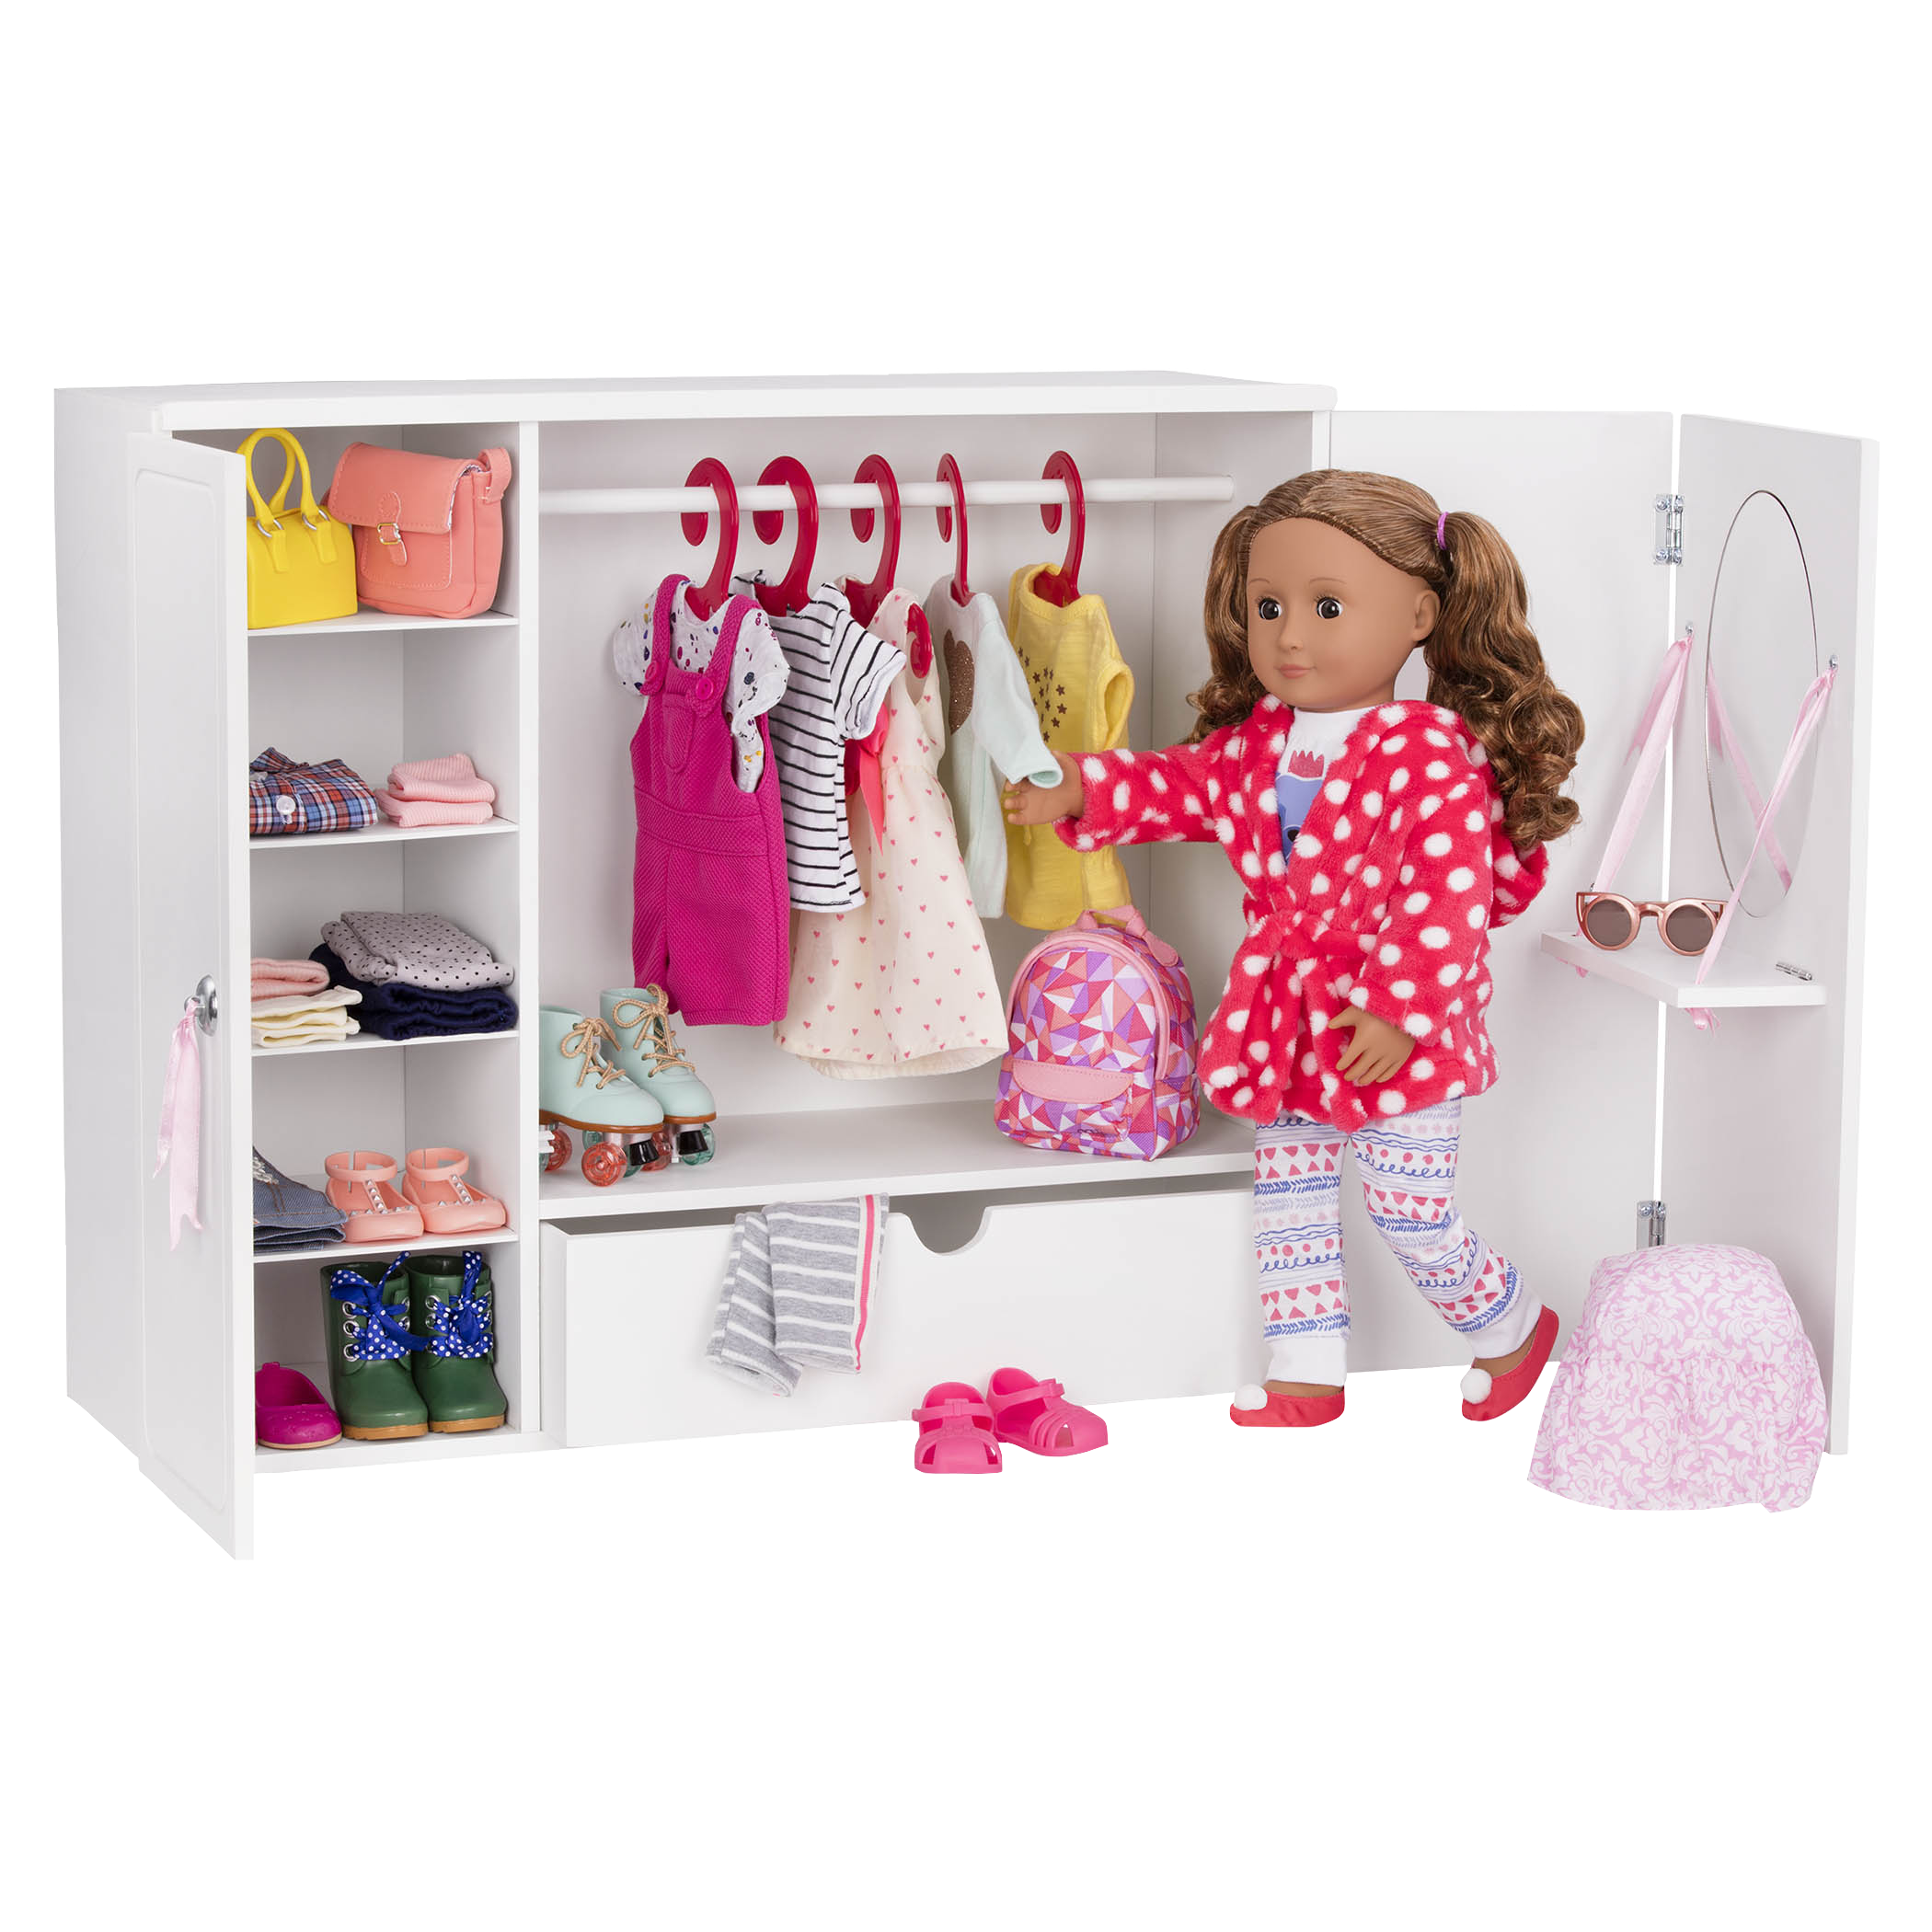 Isa and clothing inside the Wooden Wardrobe Closet for 18-inch Dolls